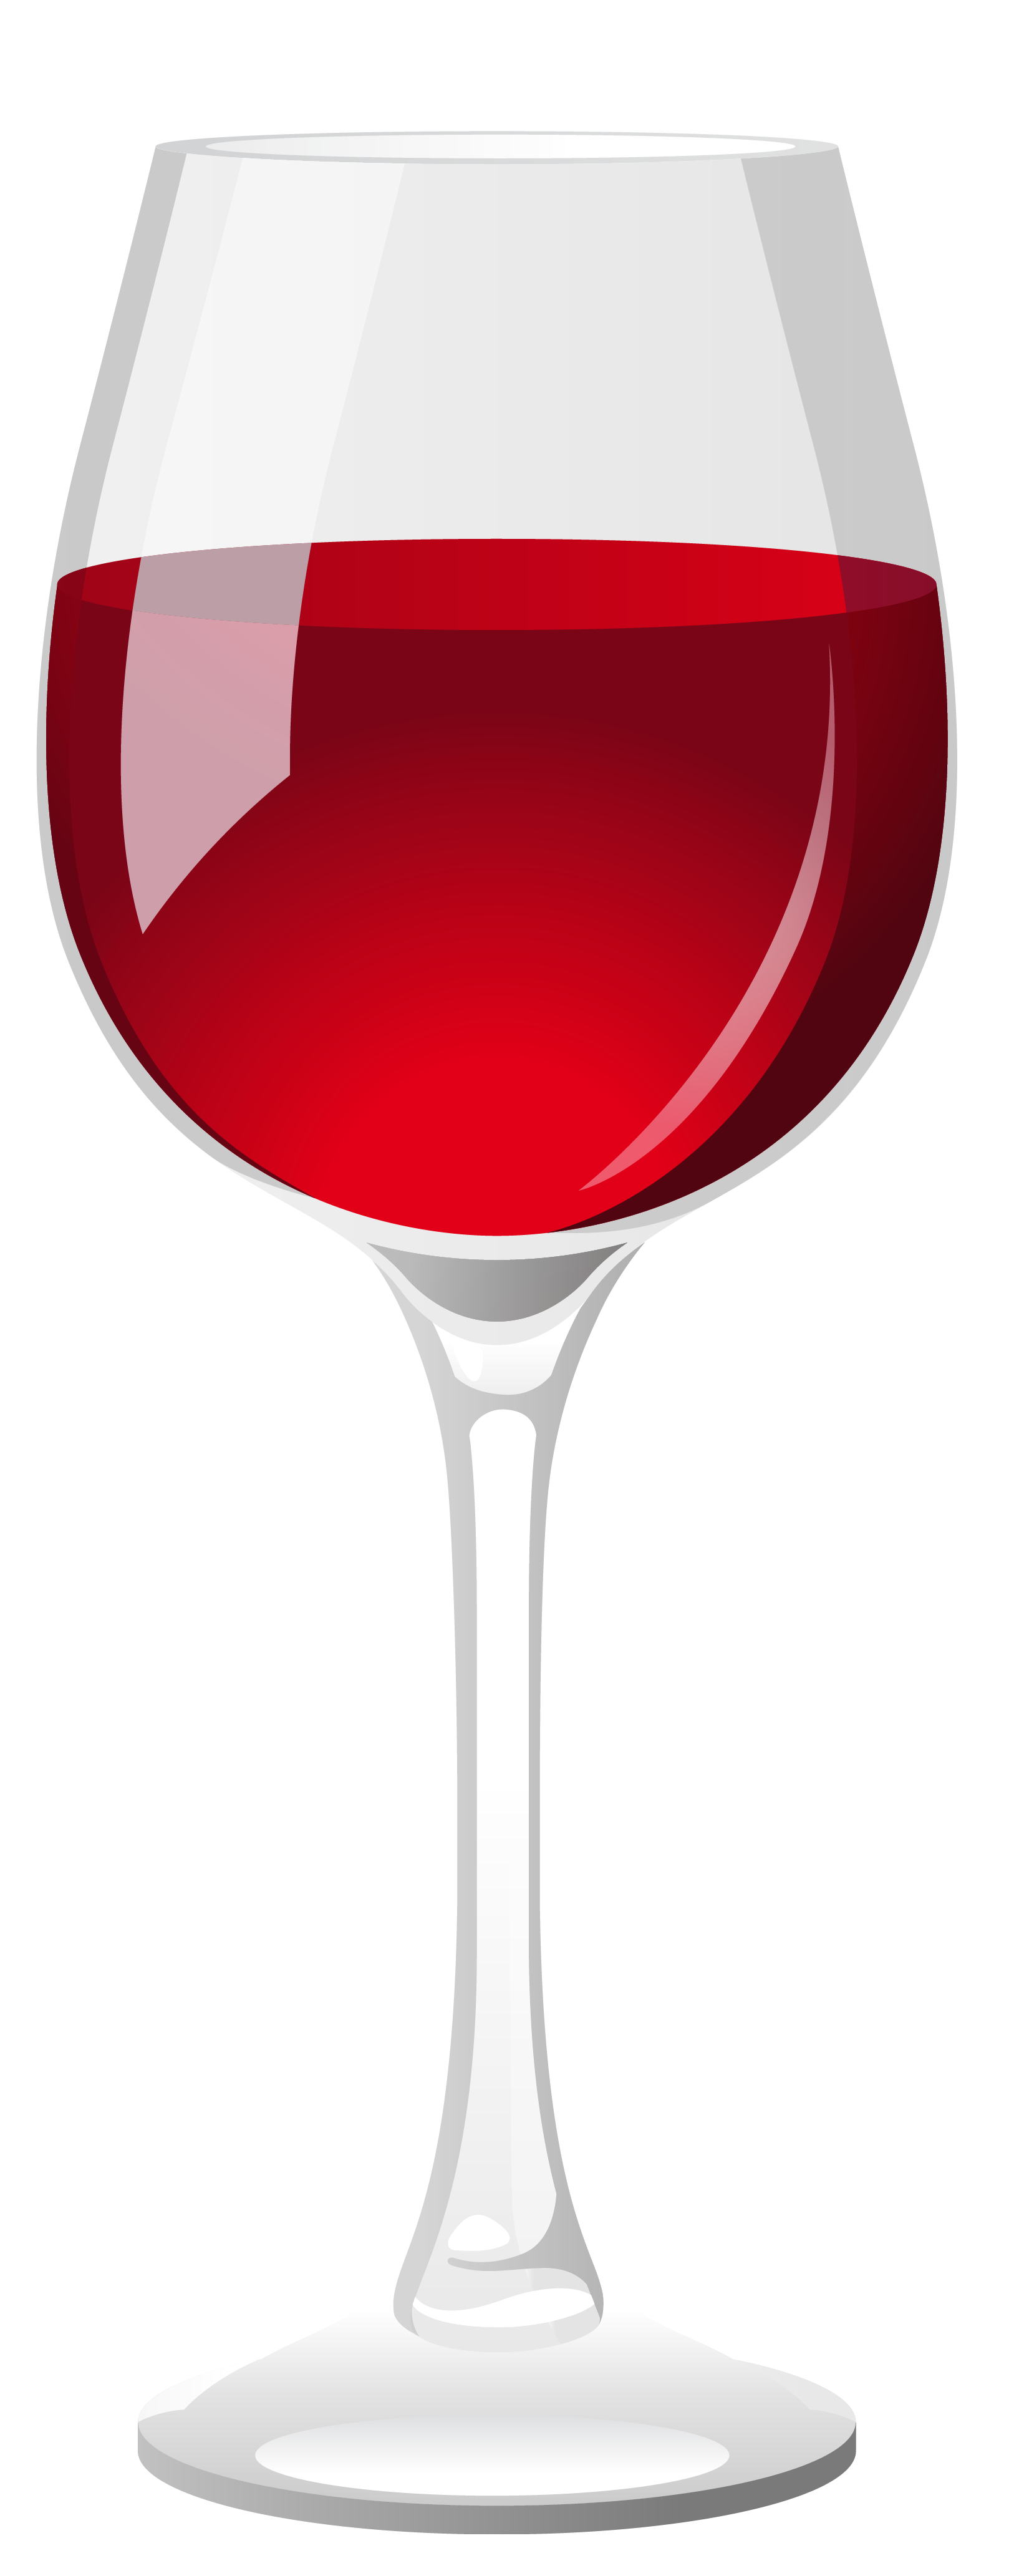 vino glass png clipart
